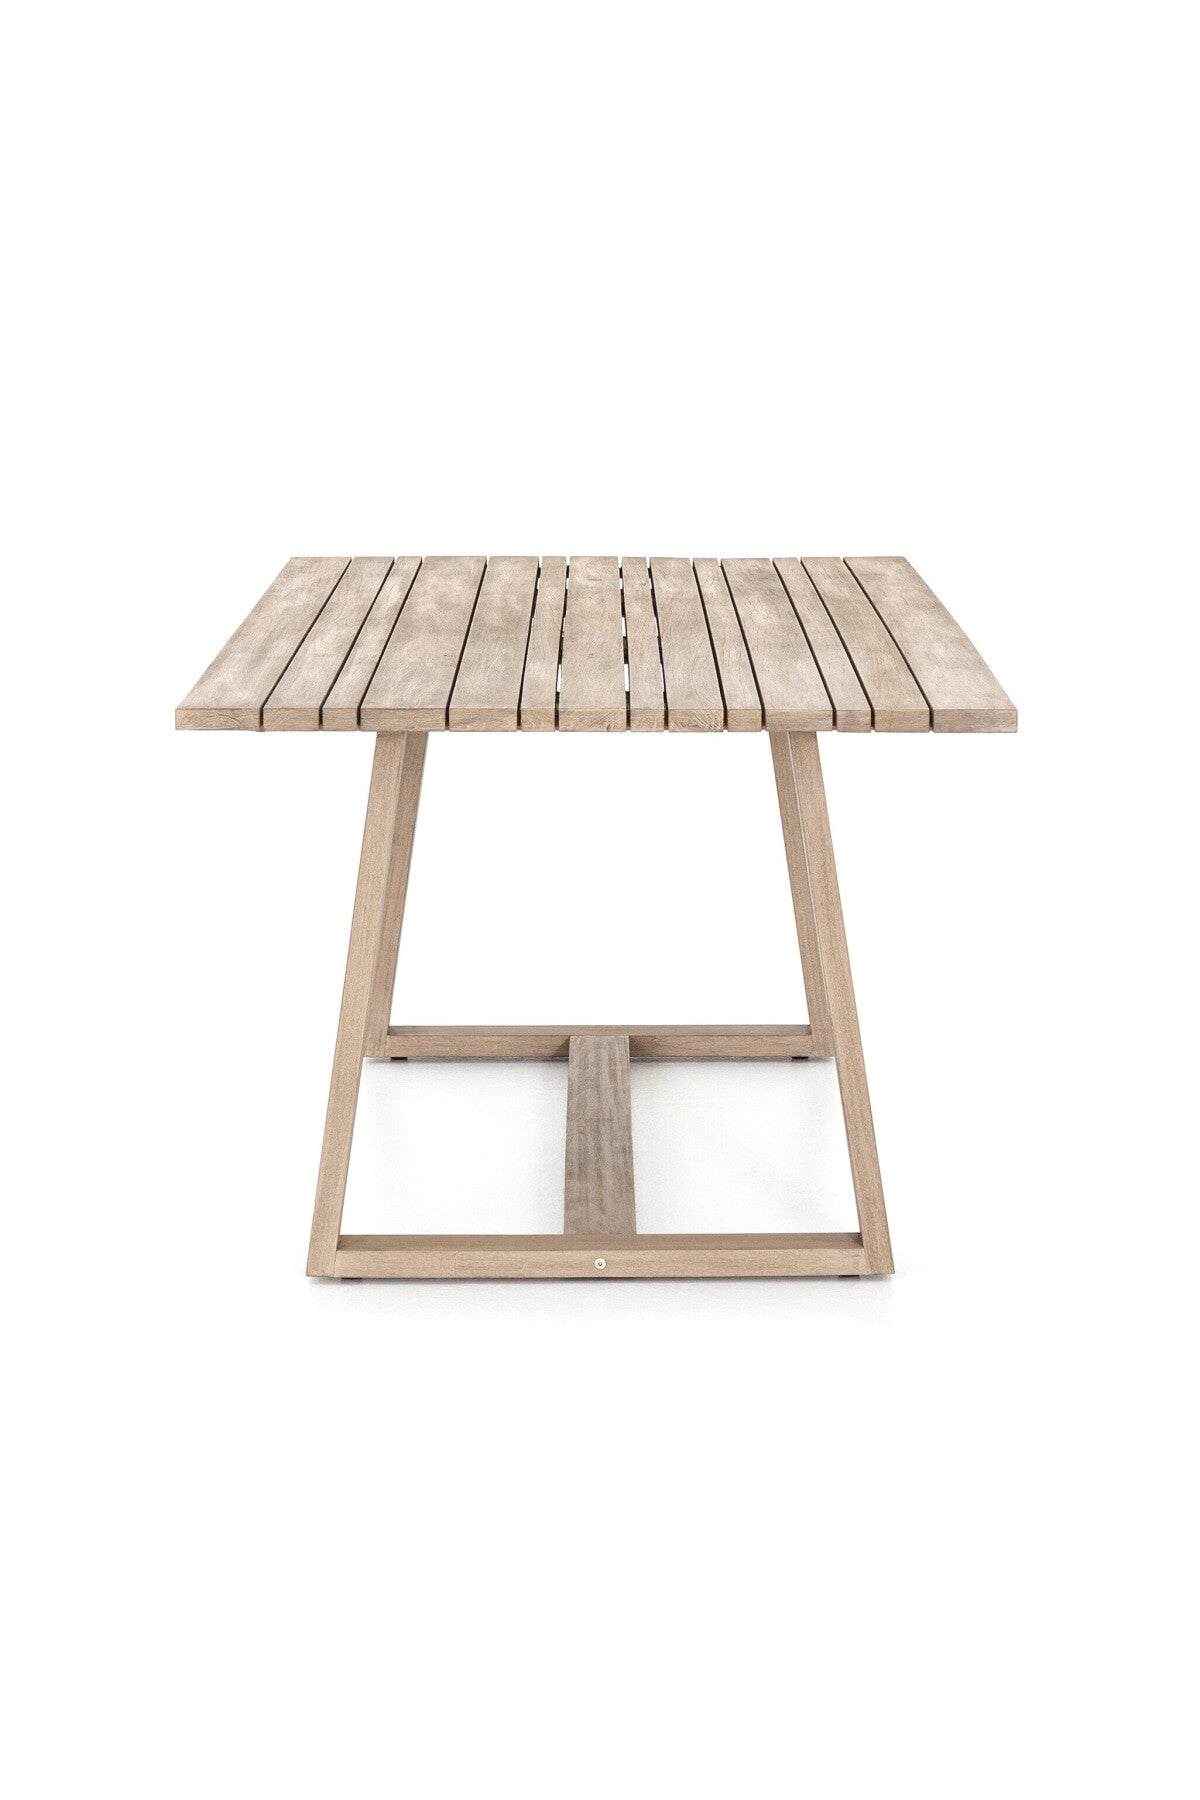 Athens Outdoor Dining Table